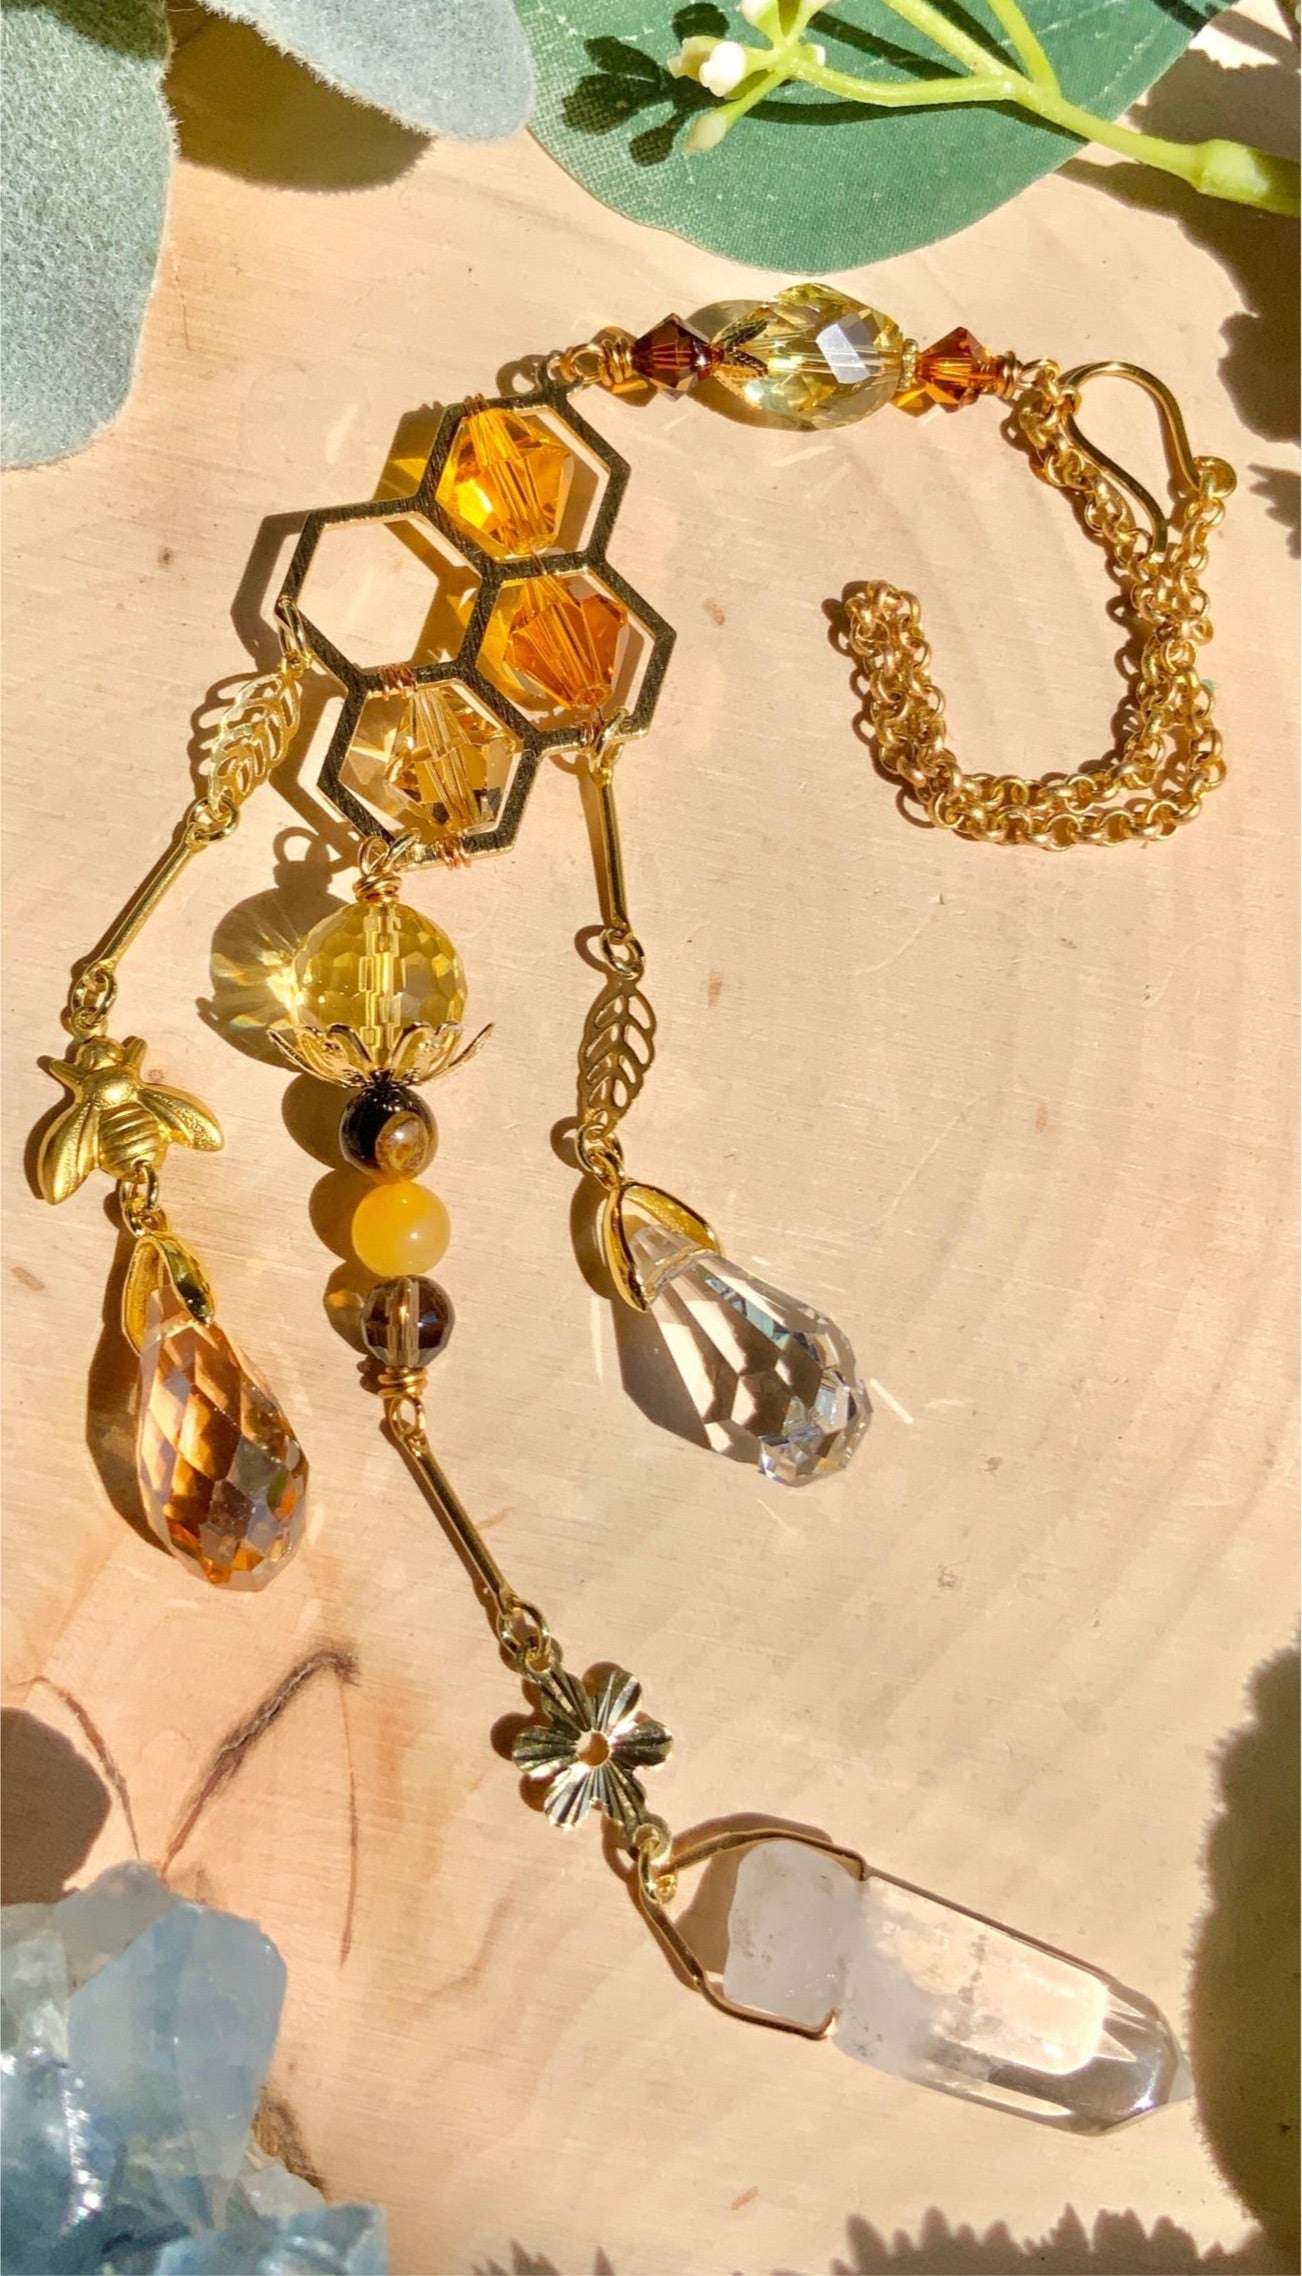 "Citrine and Honey" ~ 18k Gold-Plated Honeybee Car Charm with ombré Crystal prisms for car mirror accessories